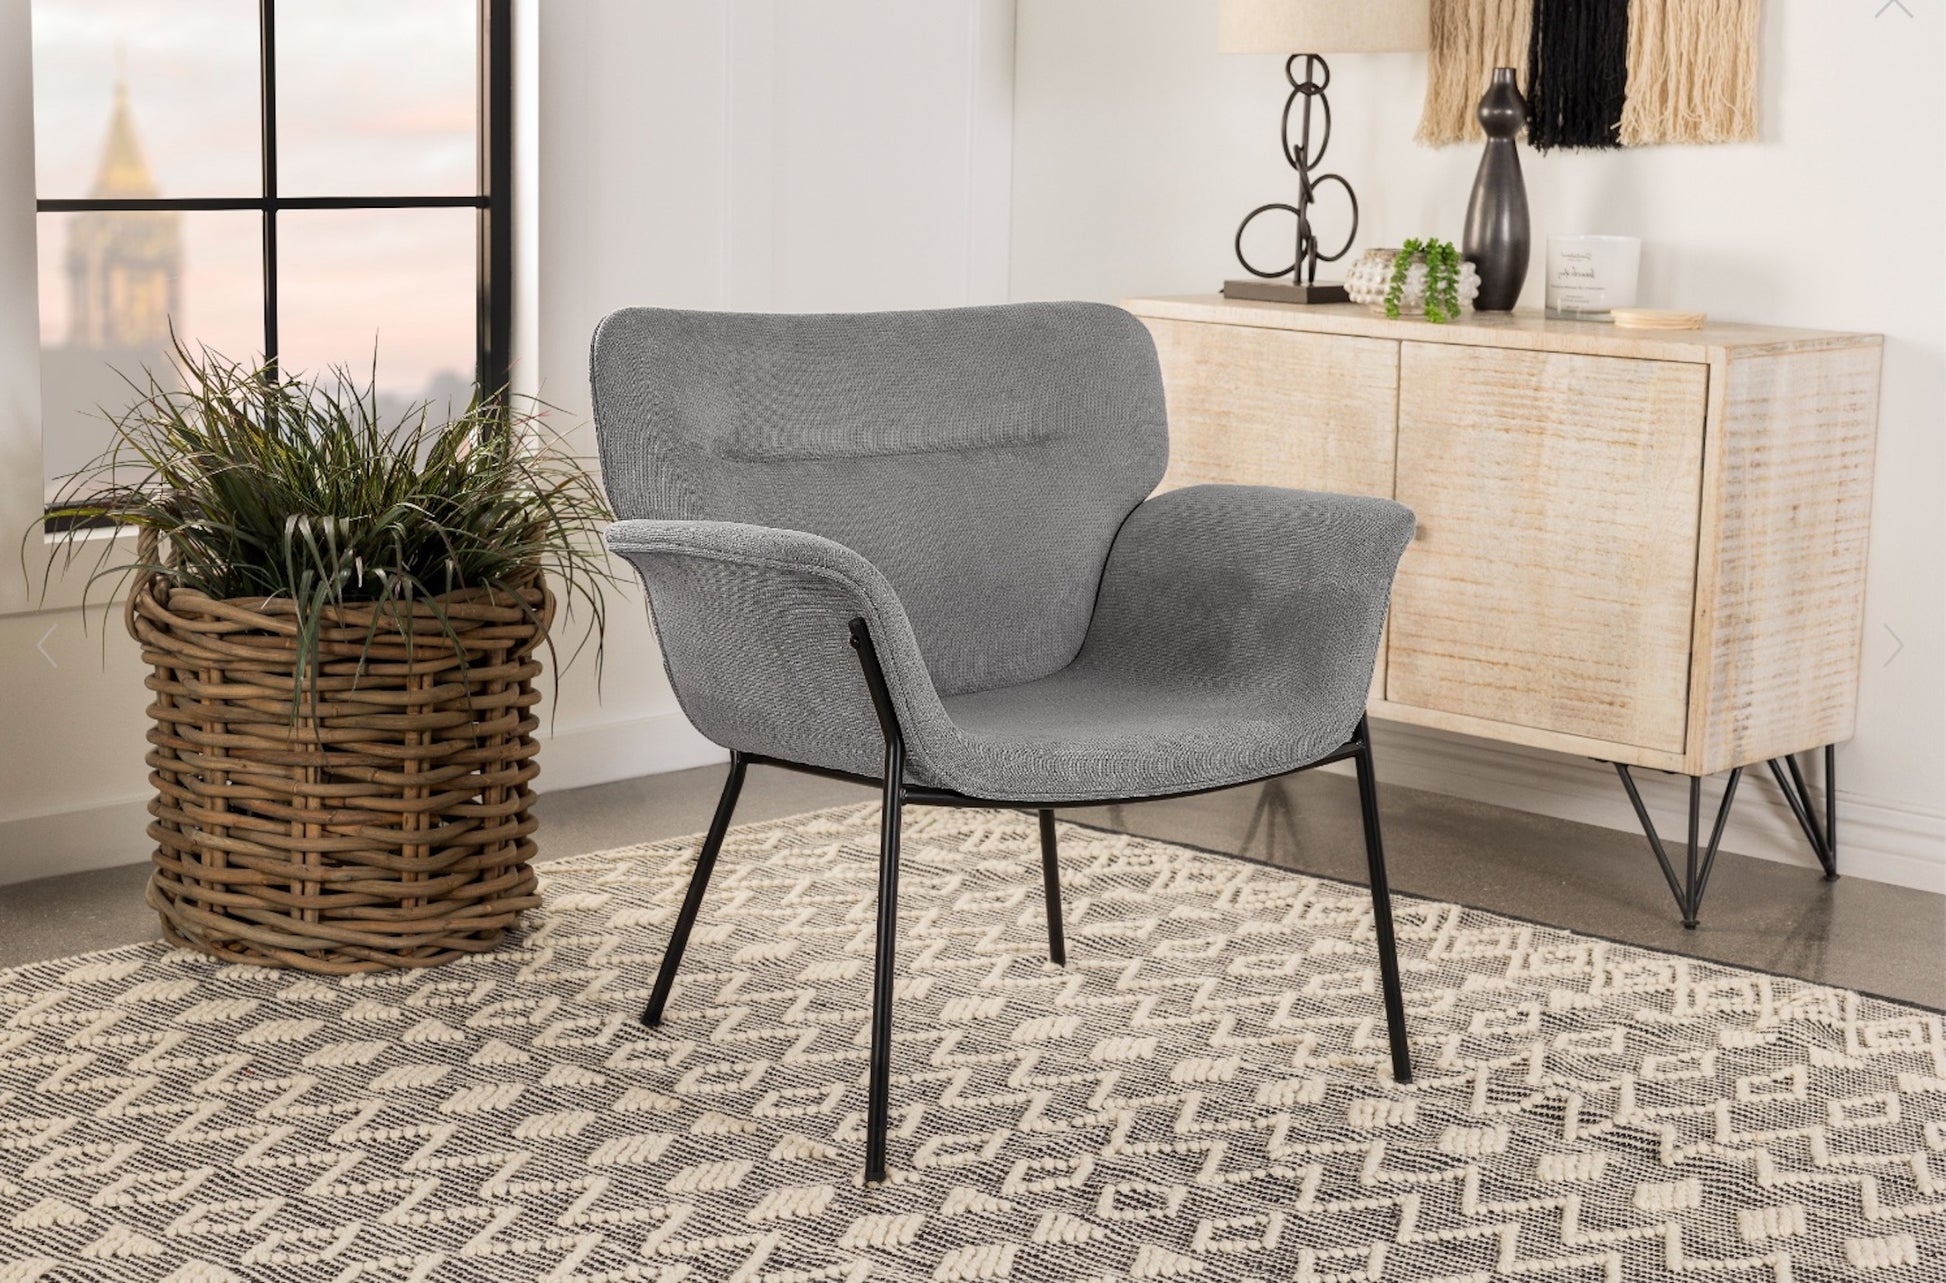 Davina Upholstered Flared Arms Accent Chair Ash Grey